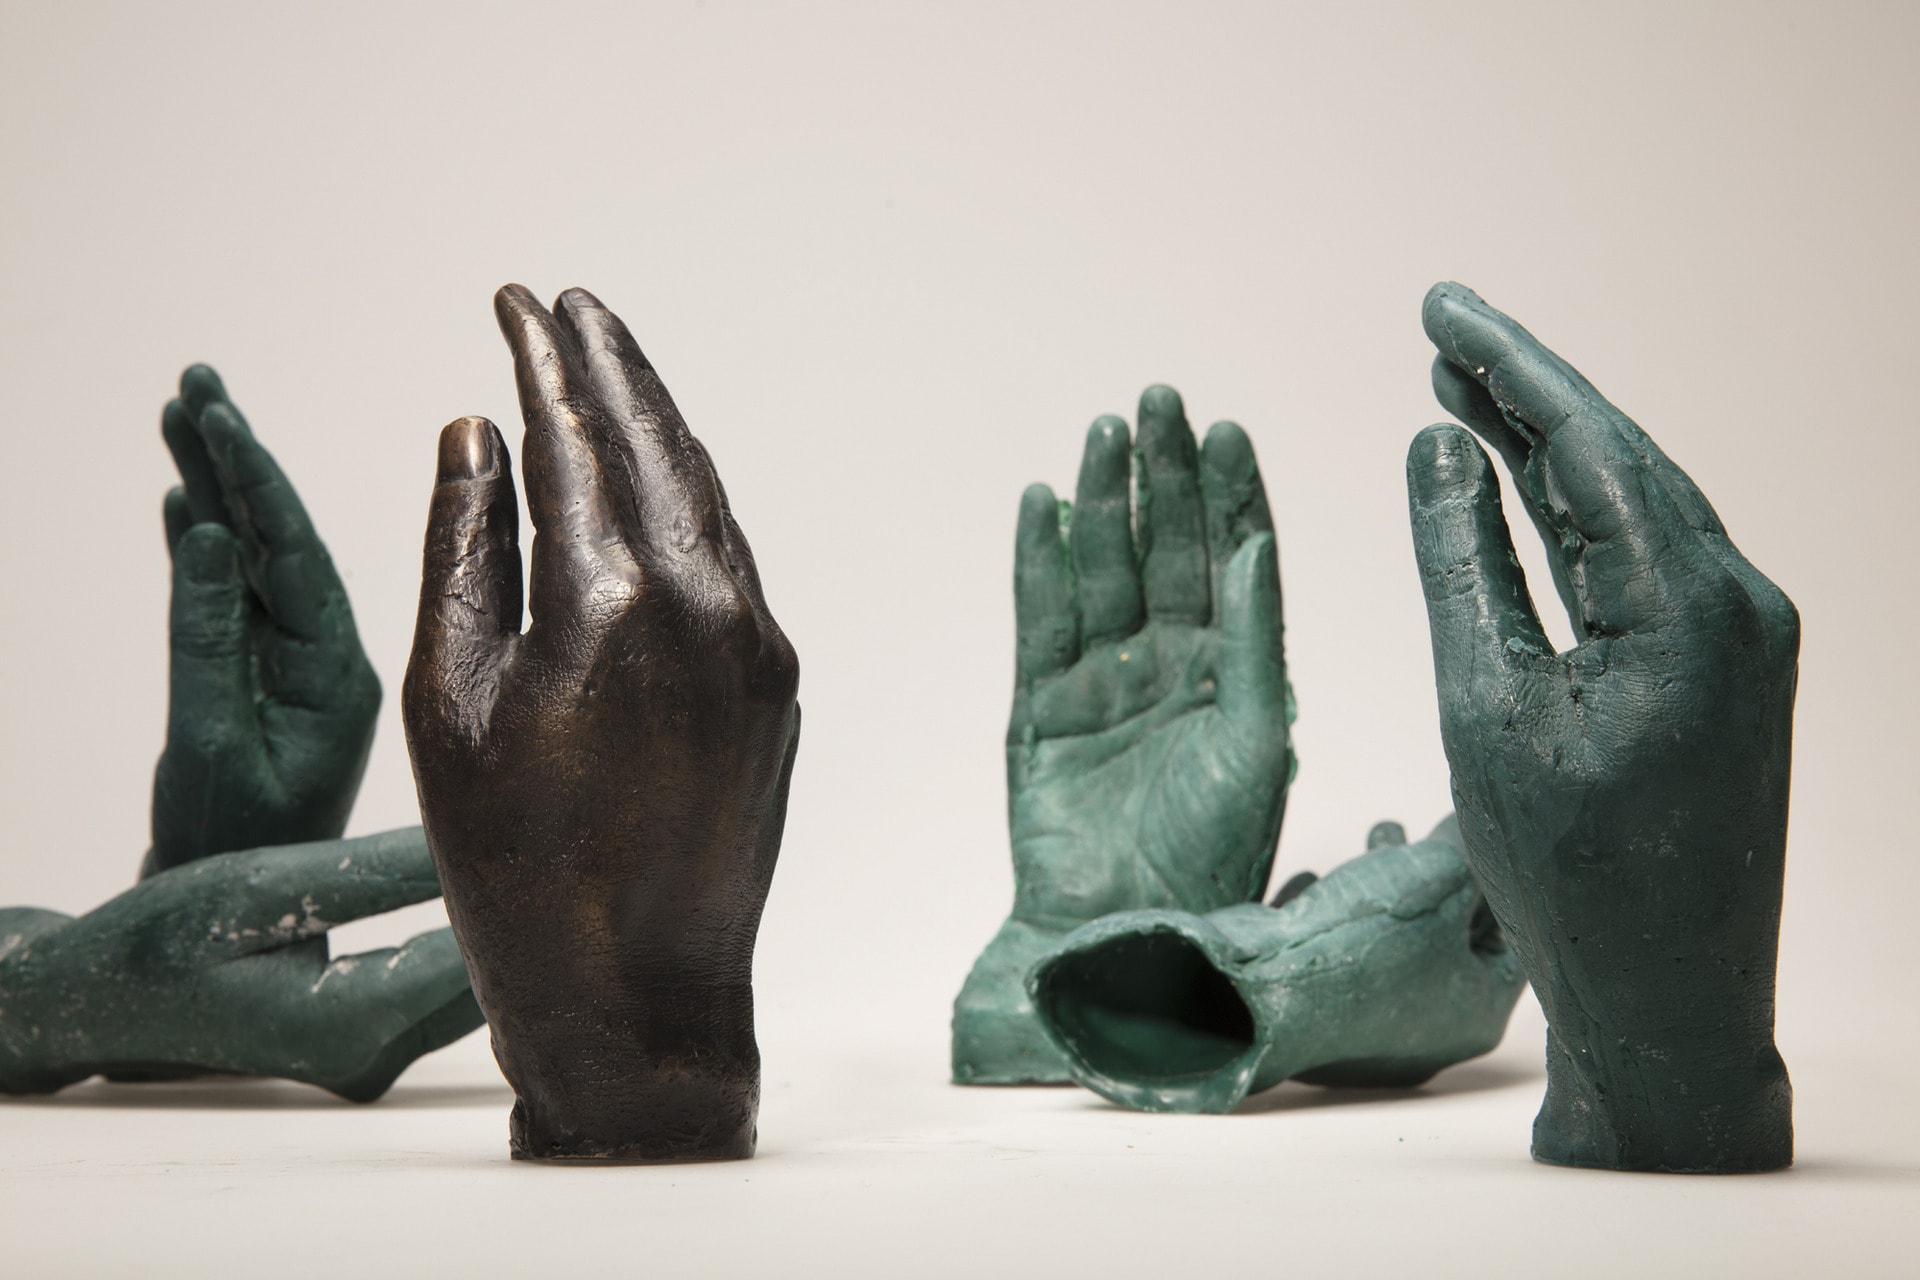 Casts of my hands, 2021, green foundry wax, black patinated bronze, 17cm x 8cm